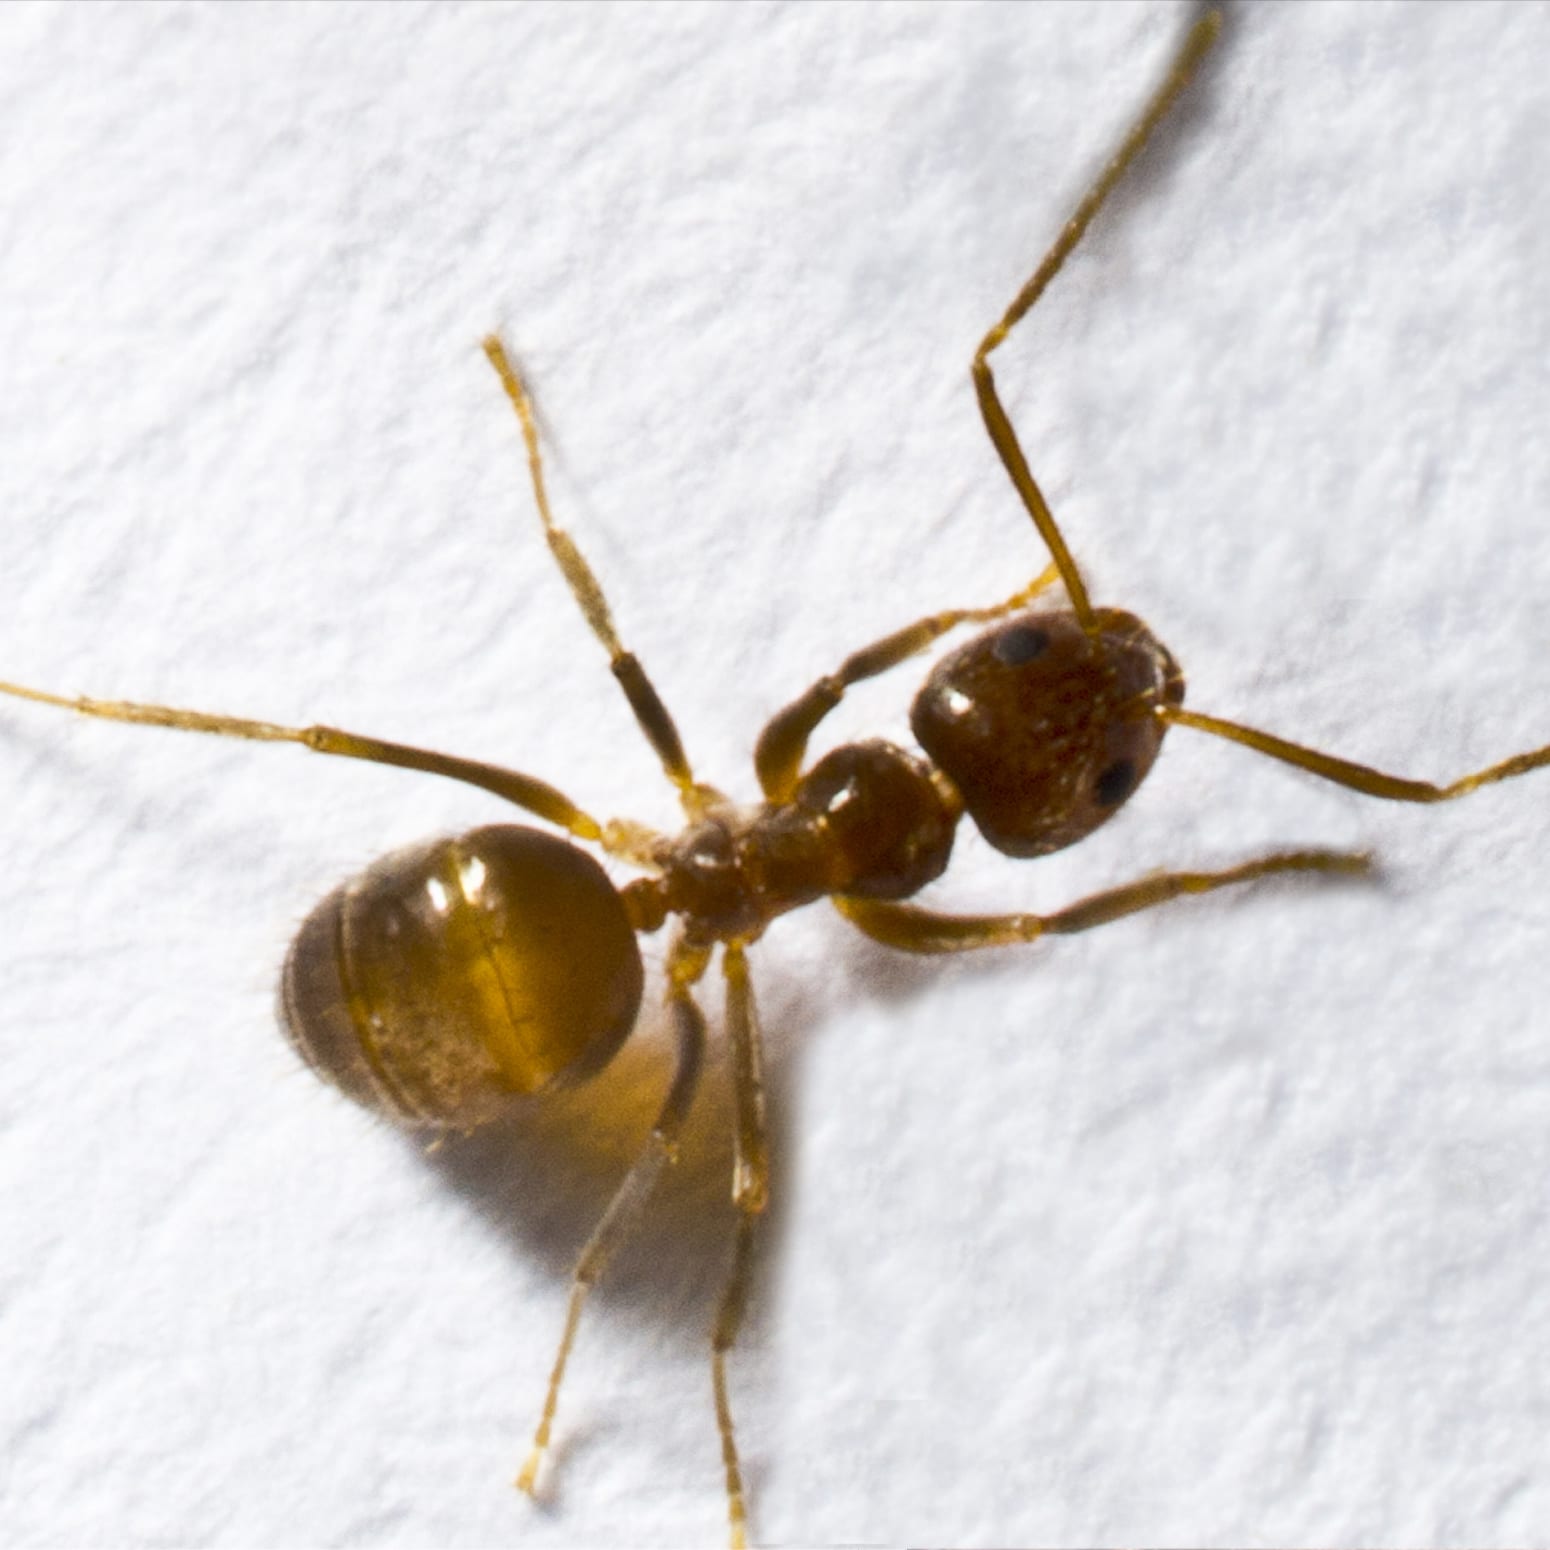 The Tawny Crazy Ant